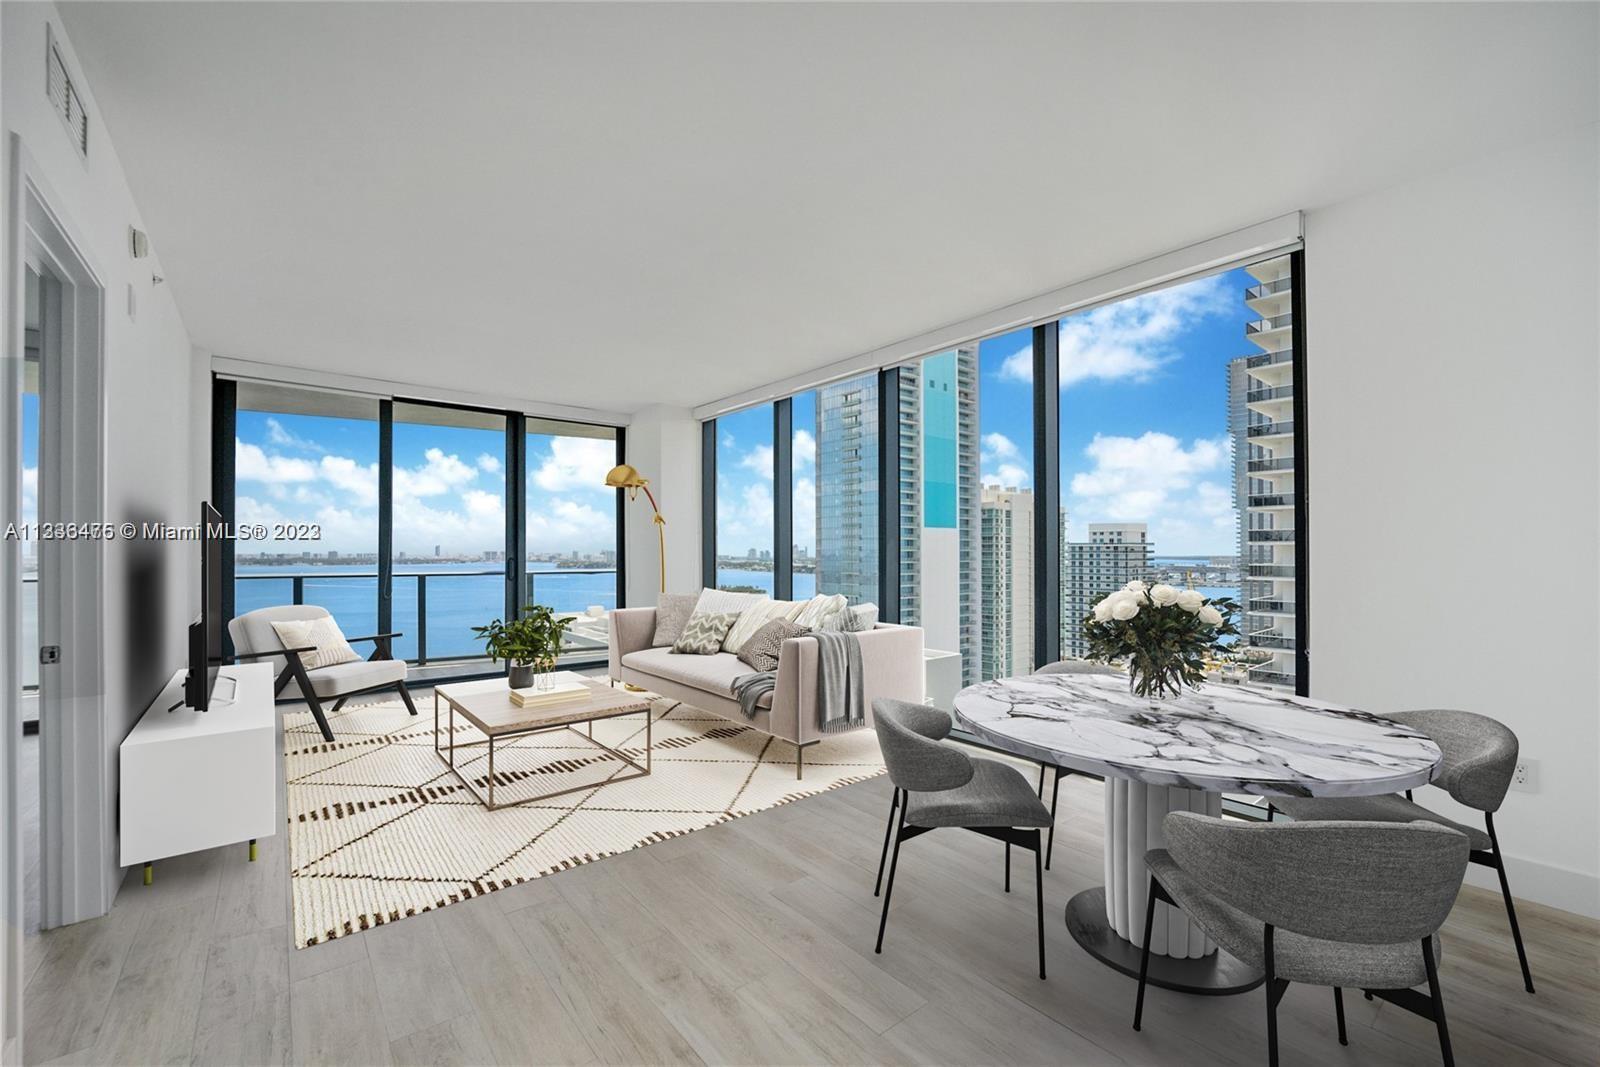 Exceptional corner unit with breathtaking unobstructed views of the Miami Bay. Desirable 3 beds, 2.5